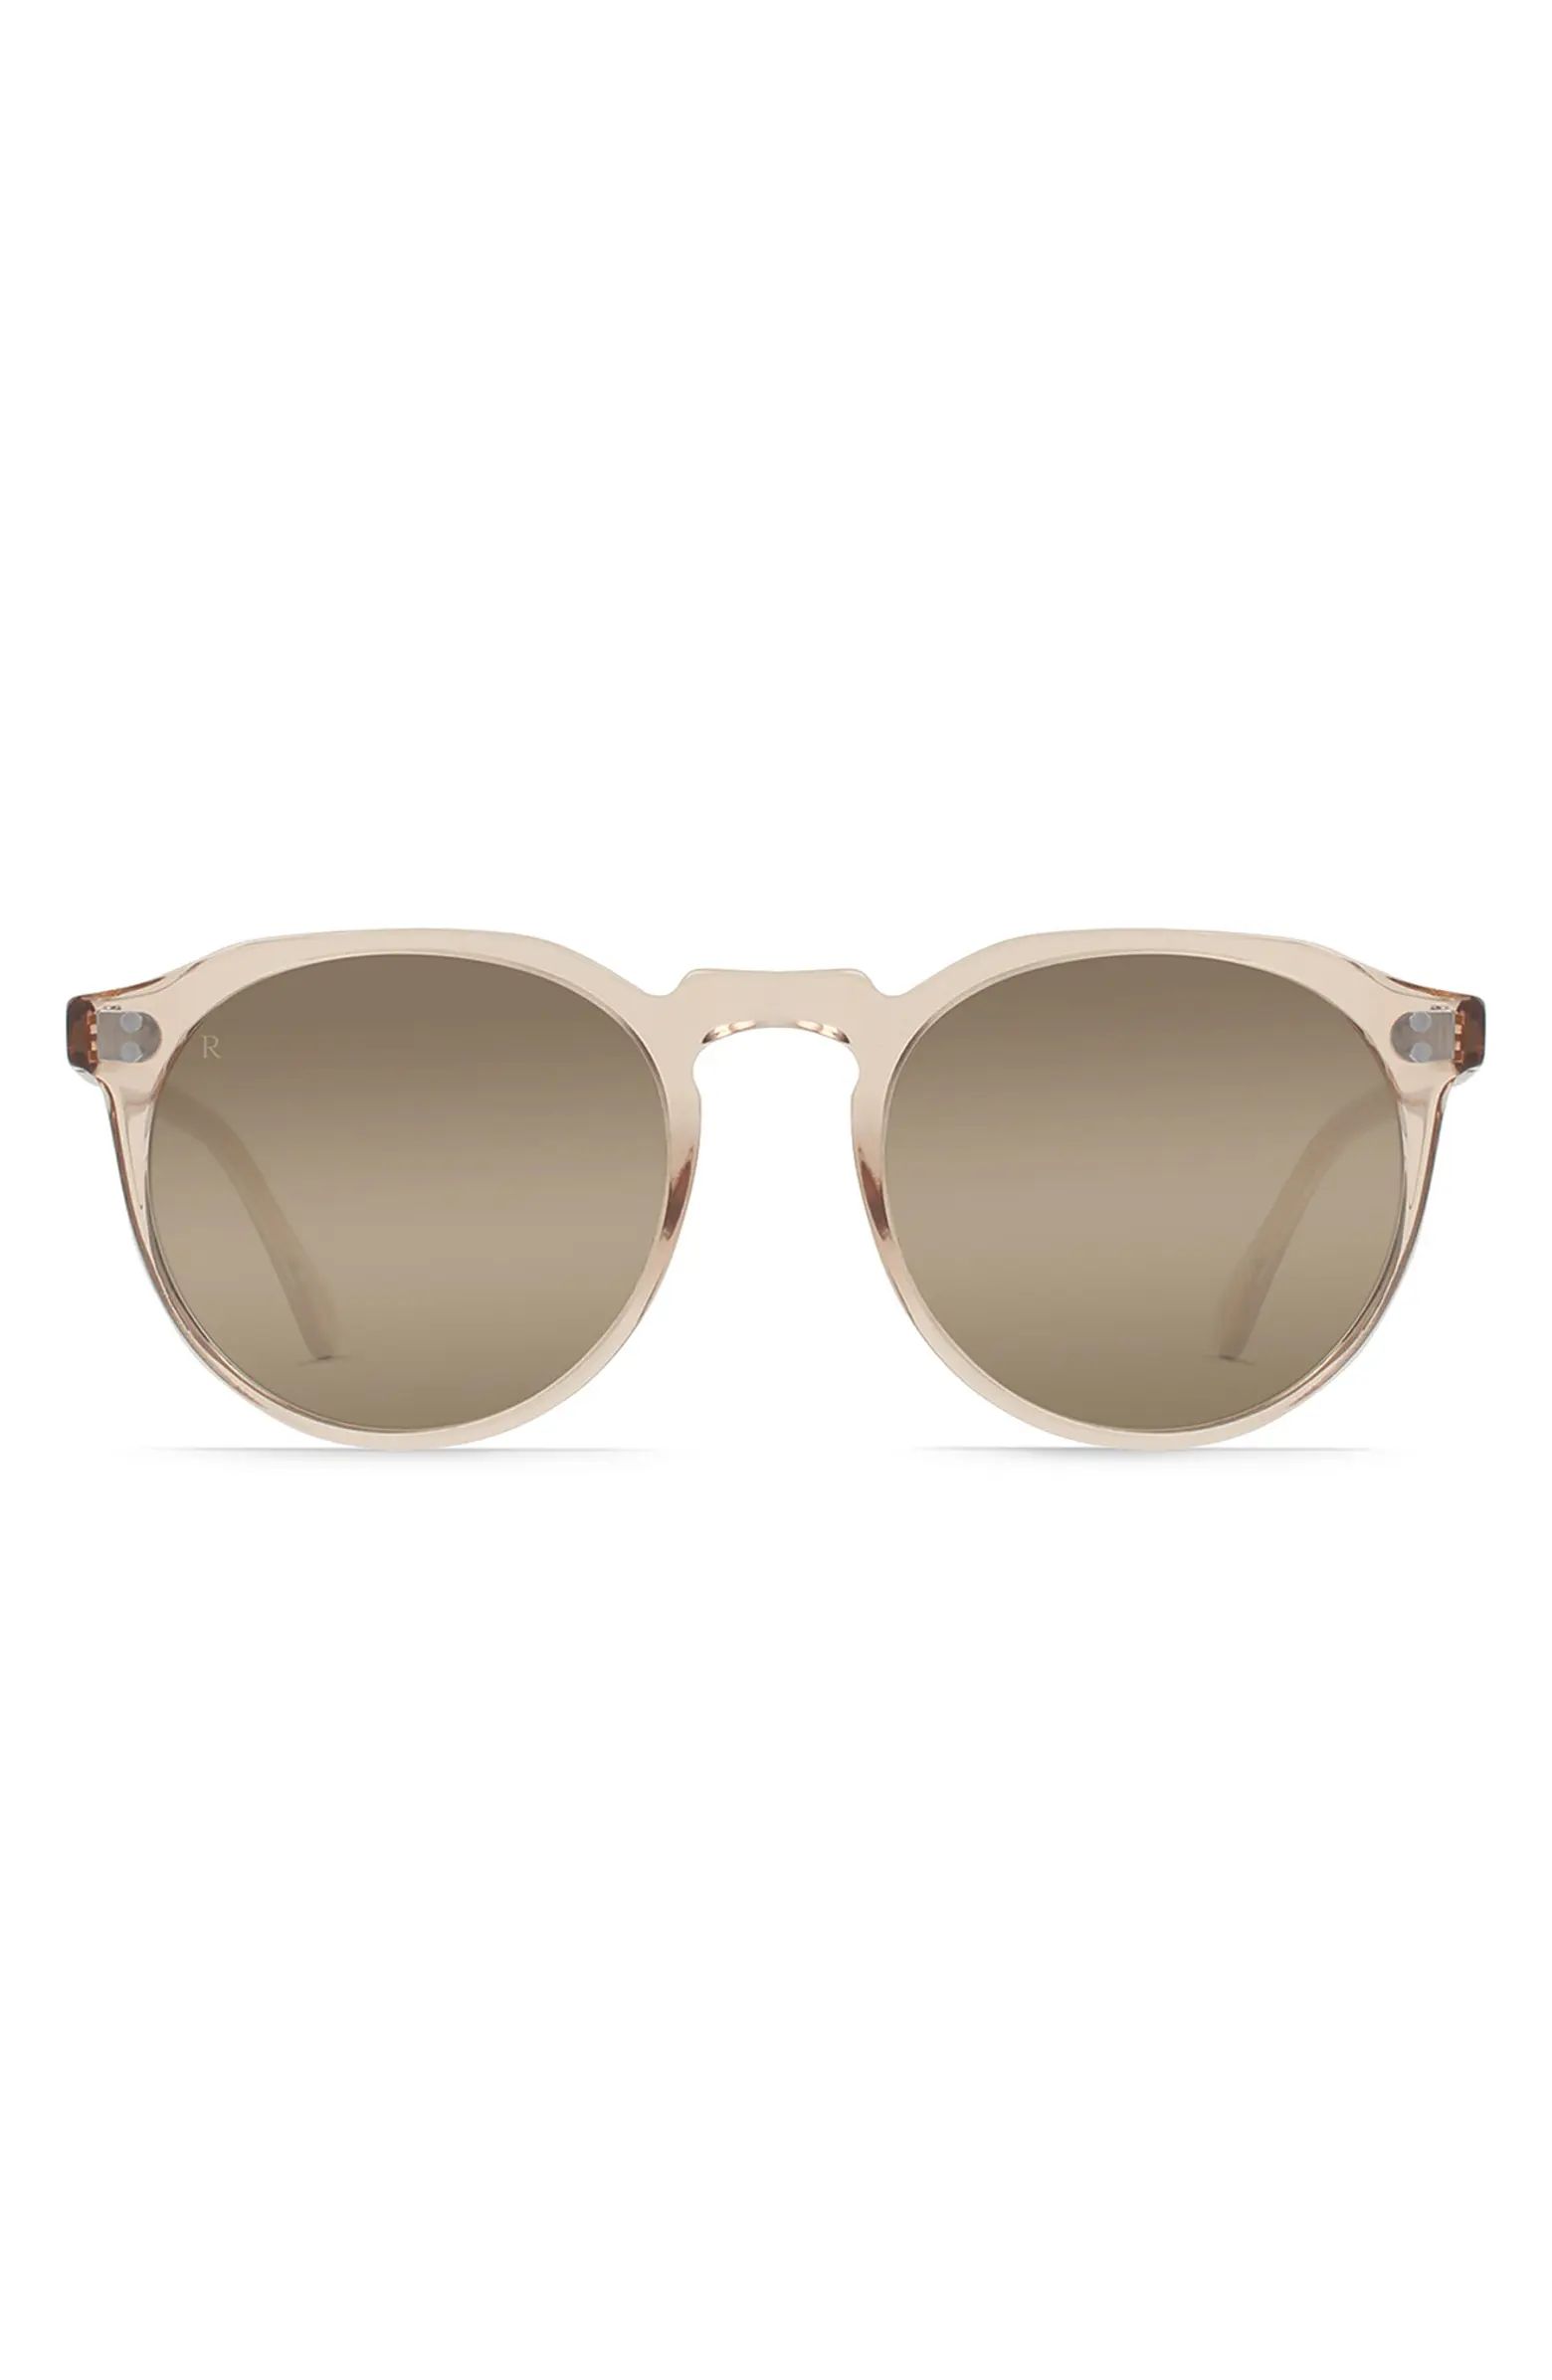 Remmy 52mm Polarized Mirrored Round Sunglasses | Nordstrom